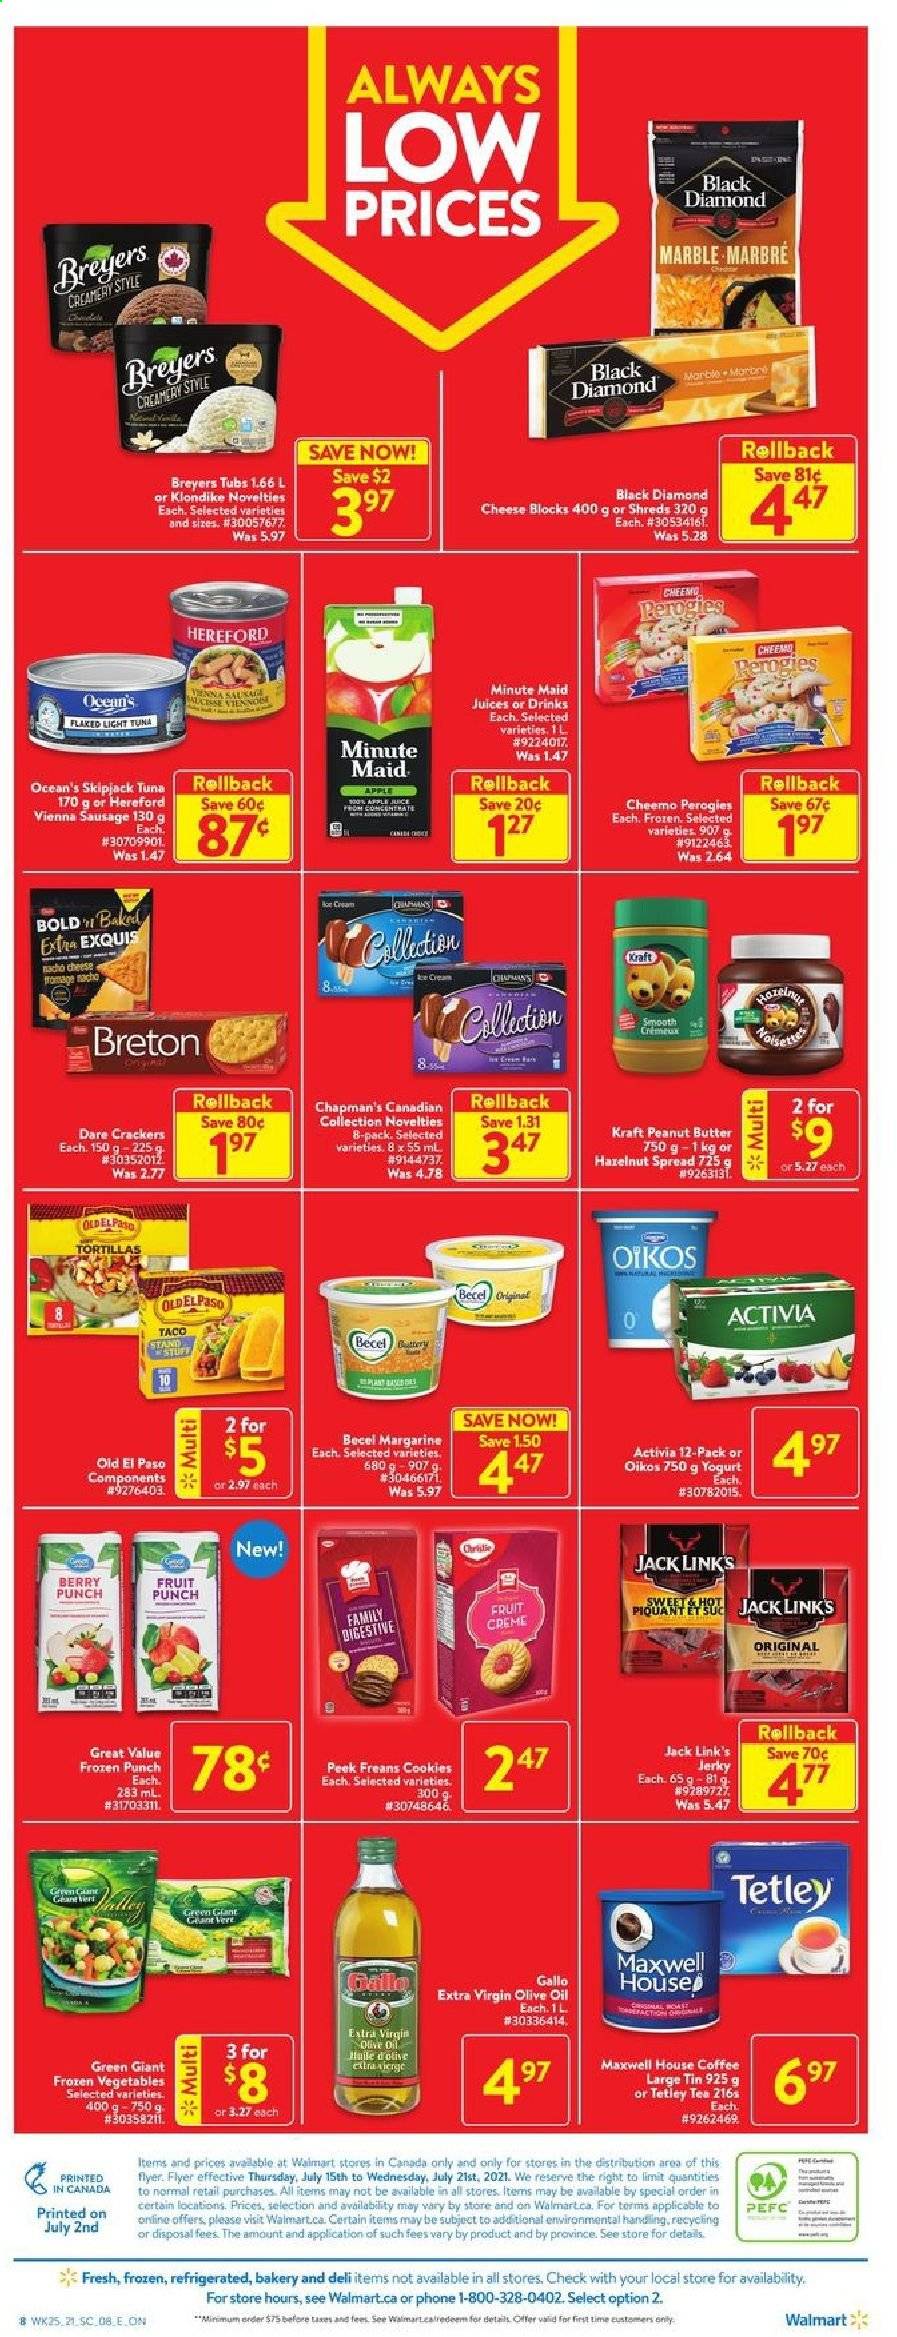 thumbnail - Walmart Flyer - July 15, 2021 - July 21, 2021 - Sales products - tortillas, Old El Paso, tuna, Kraft®, jerky, sausage, vienna sausage, cheese, yoghurt, Activia, Oikos, margarine, frozen vegetables, crackers, Digestive, Jack Link's, light tuna, extra virgin olive oil, olive oil, oil, peanut butter, hazelnut spread, apple juice, juice, fruit punch, Maxwell House, tea, coffee. Page 3.